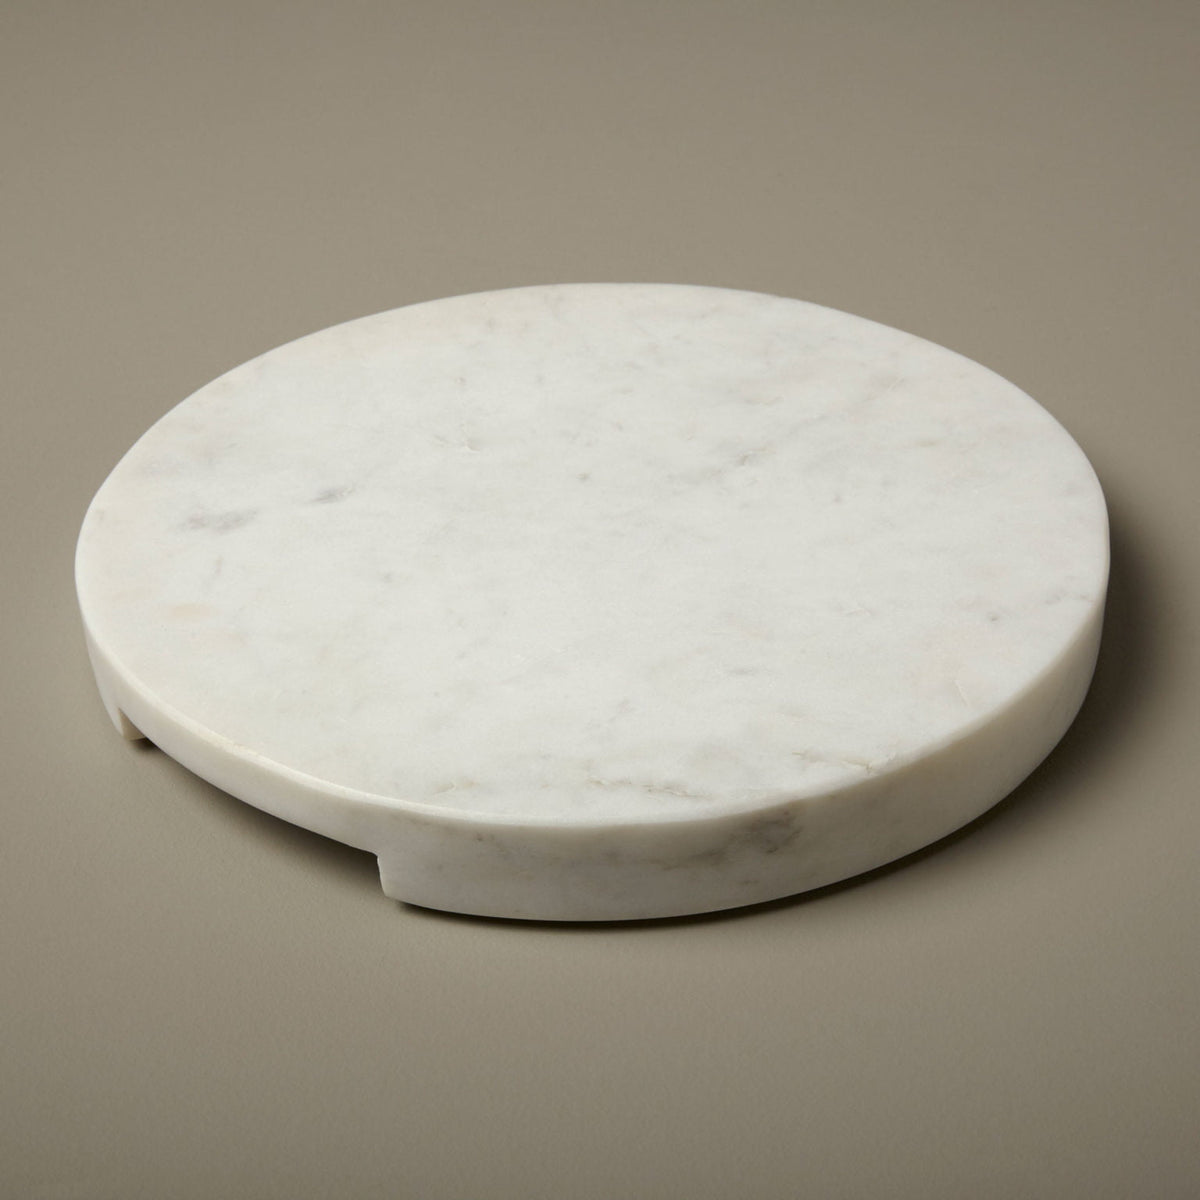 Be-Home_White-Marble-Thick-Round-Board-with-Handle-Grooves_580-04-1536x1536